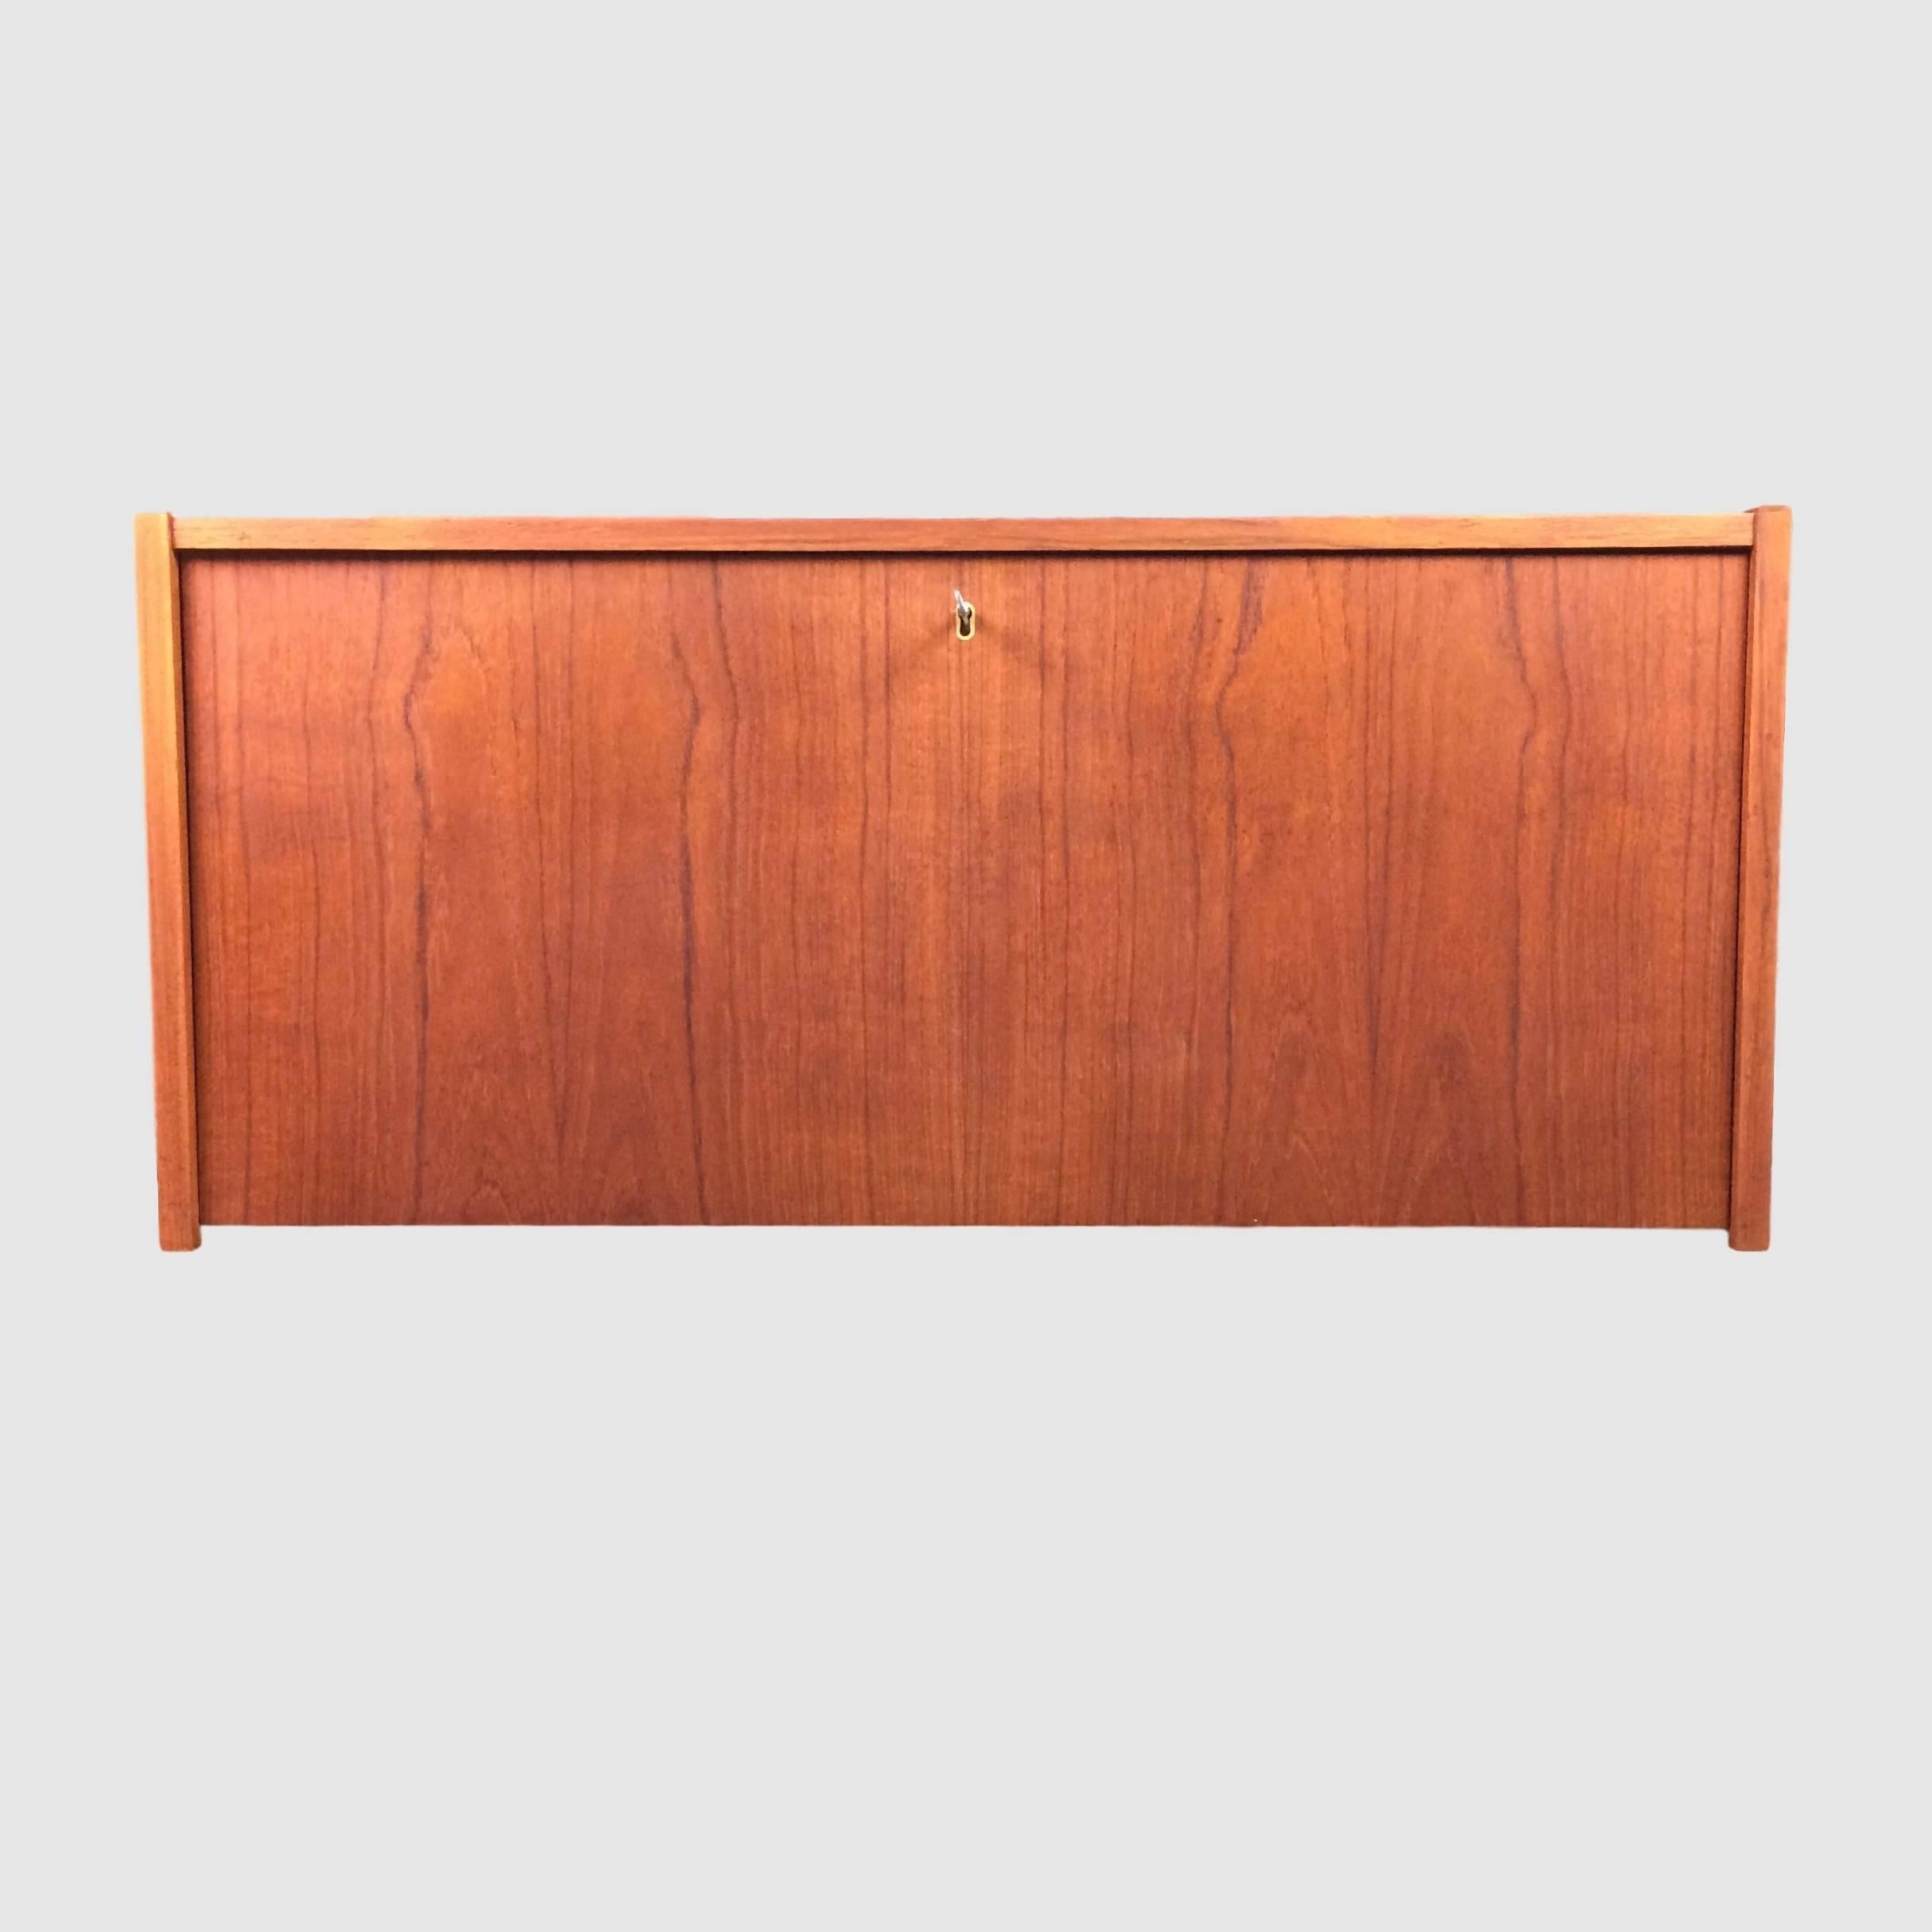 Incredibly beautiful and well maintained Danish designed mini bar in teak veneer. 

The bar has two small shelves inside, which is fitted with small brass studs. 
Door can be tilted down and is held in place with a brass locking mechanism. 
The